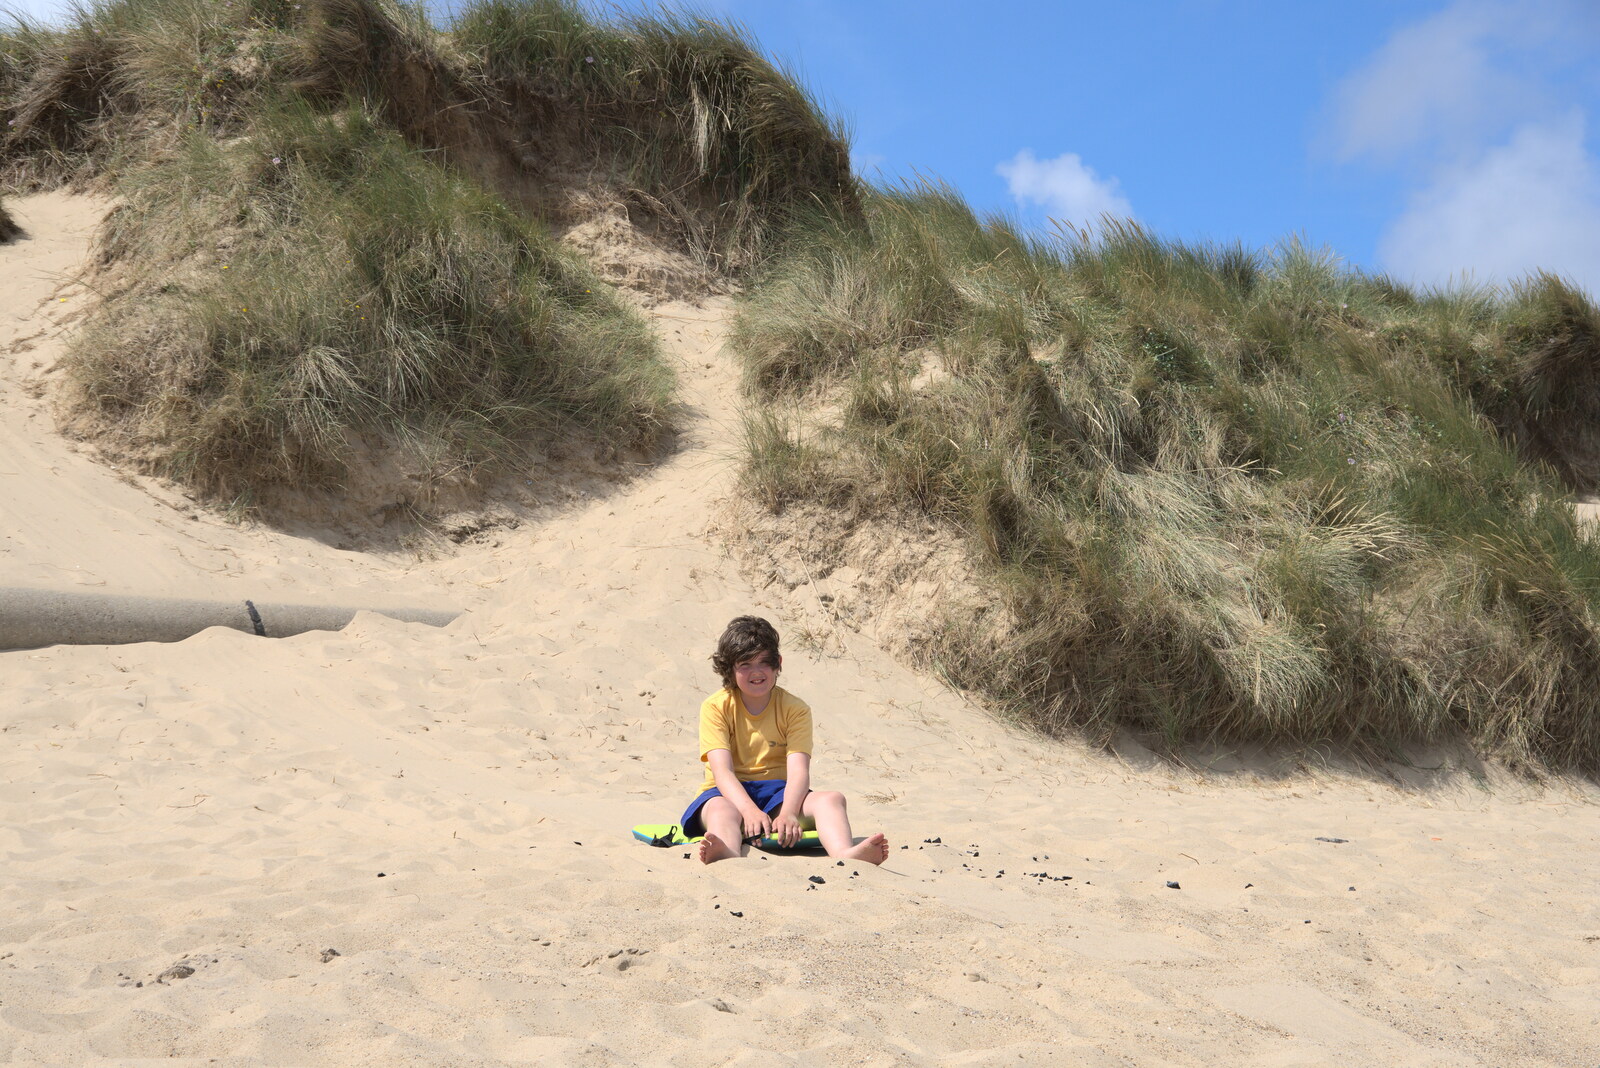 Fred sits on the sand from Camping in the Dunes, Waxham Sands, Norfolk - 9th July 2022